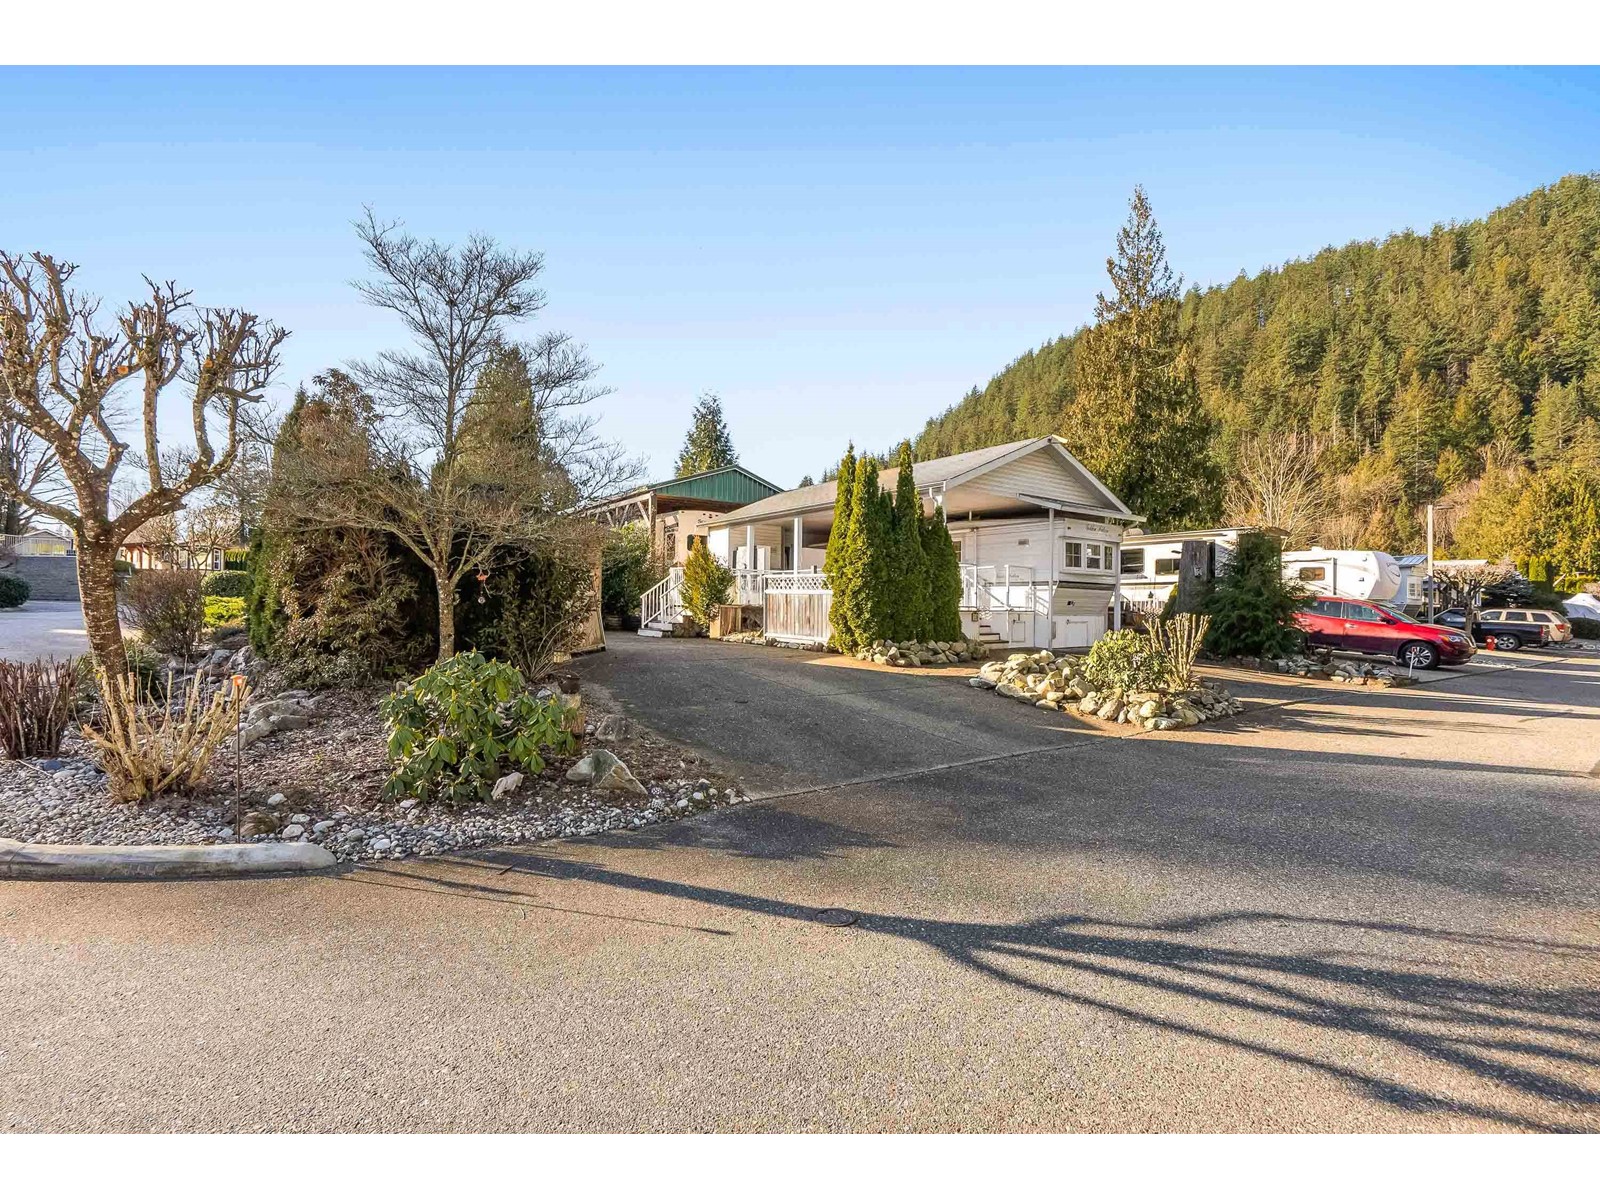 72 14600 MORRIS VALLEY ROAD ROAD, Mission